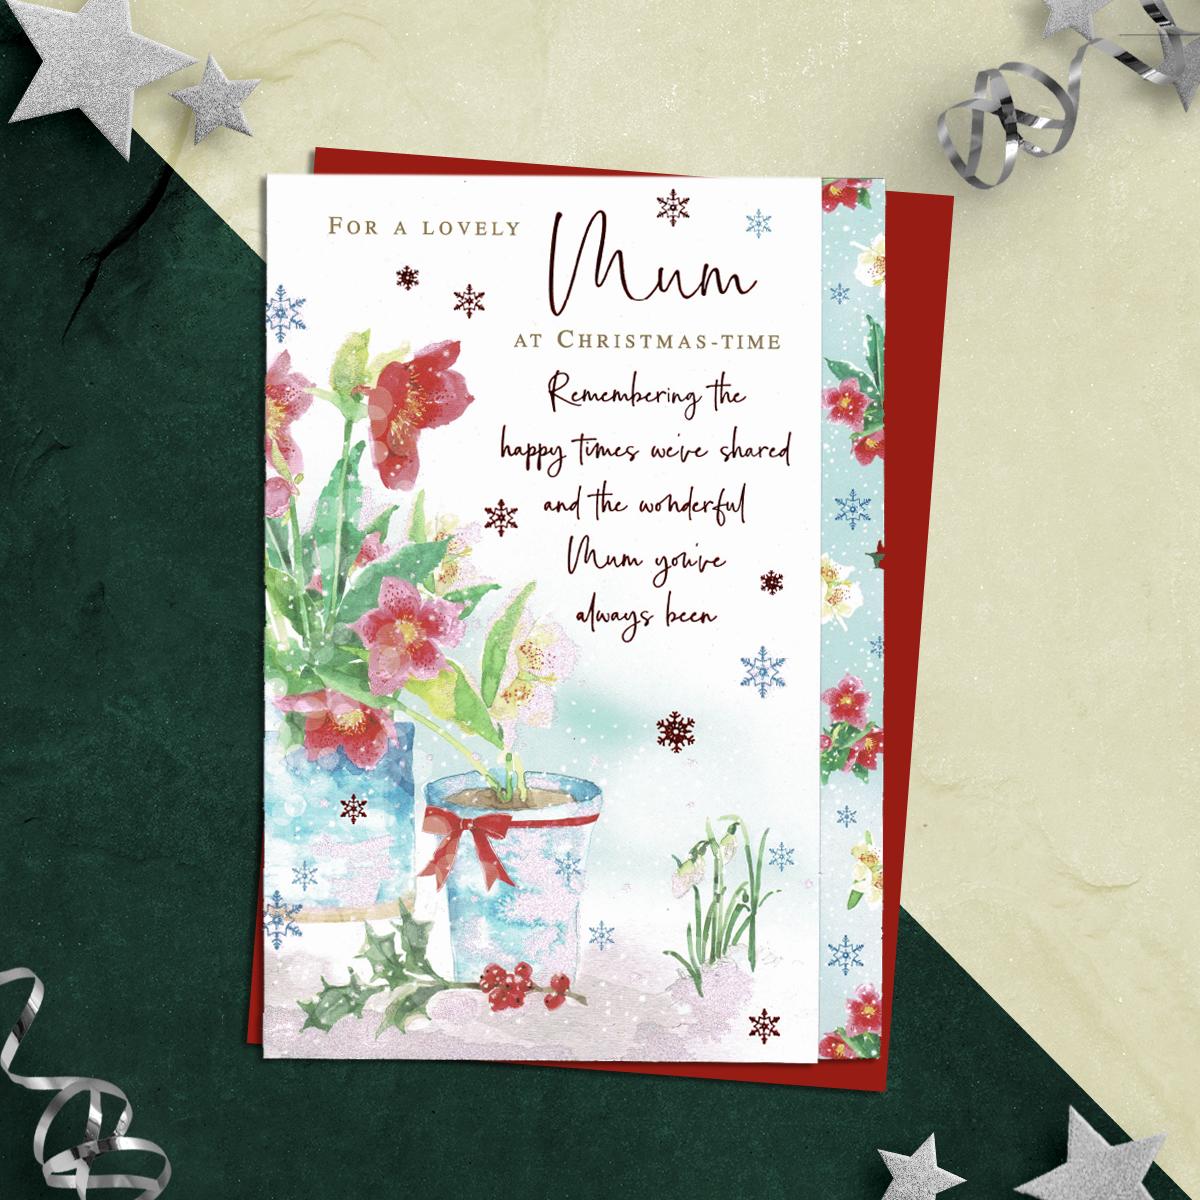 For A Lovely Mum At Christmas Time Featuring Plants, Berries And Snowdrops. Finished With Red Foil Detail, Sparkle And Red Envelope